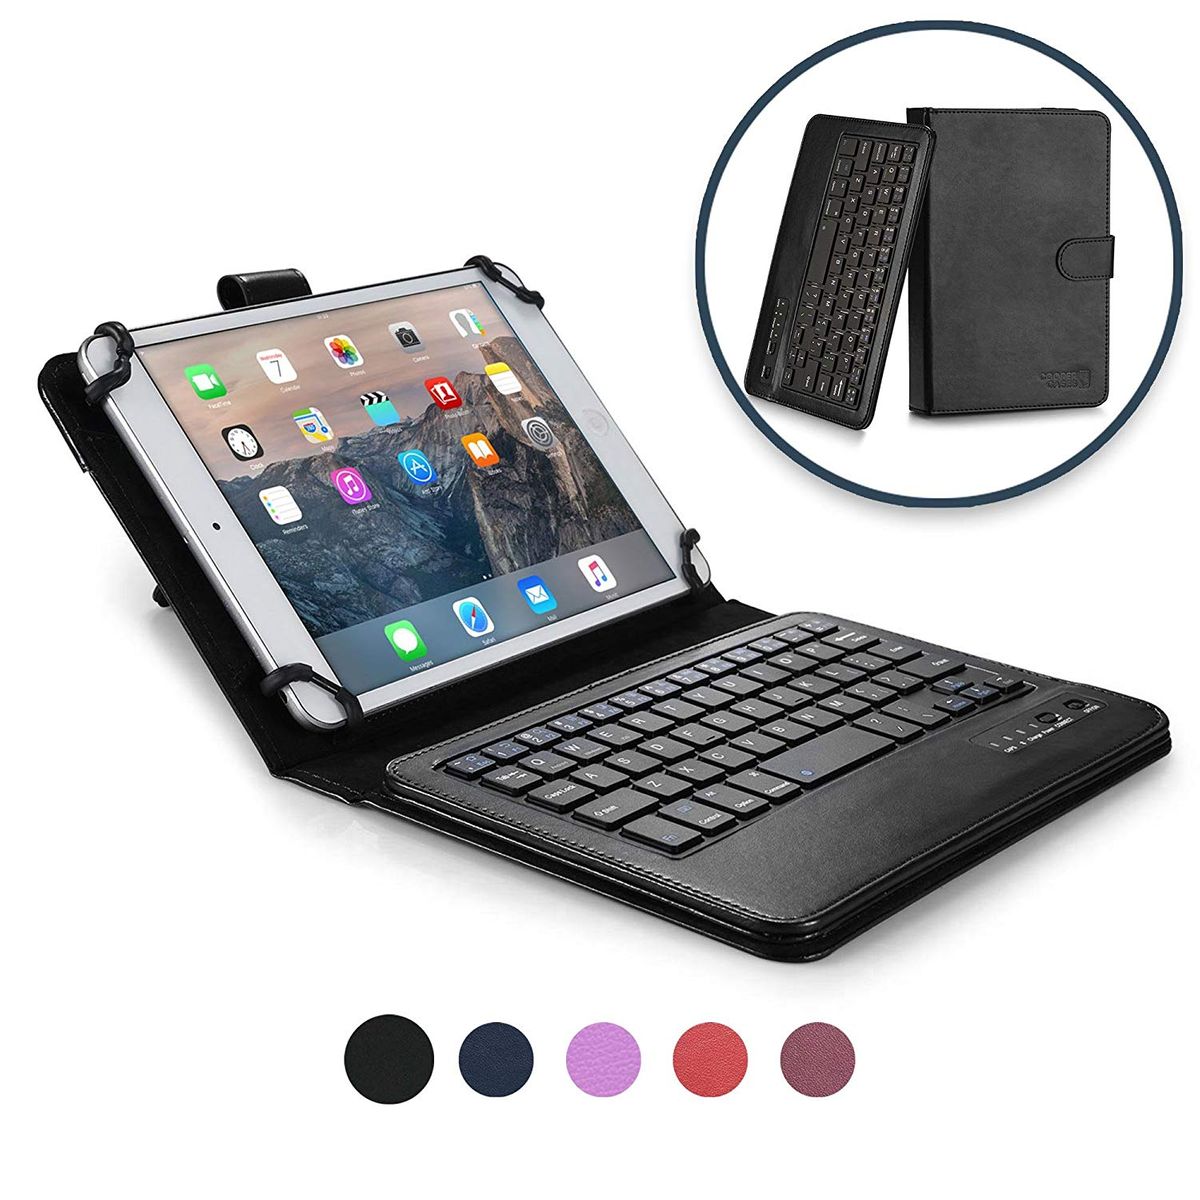 COOPER INFINITE EXECUTIVE Keyboard case for 7' - 8' inch tablet